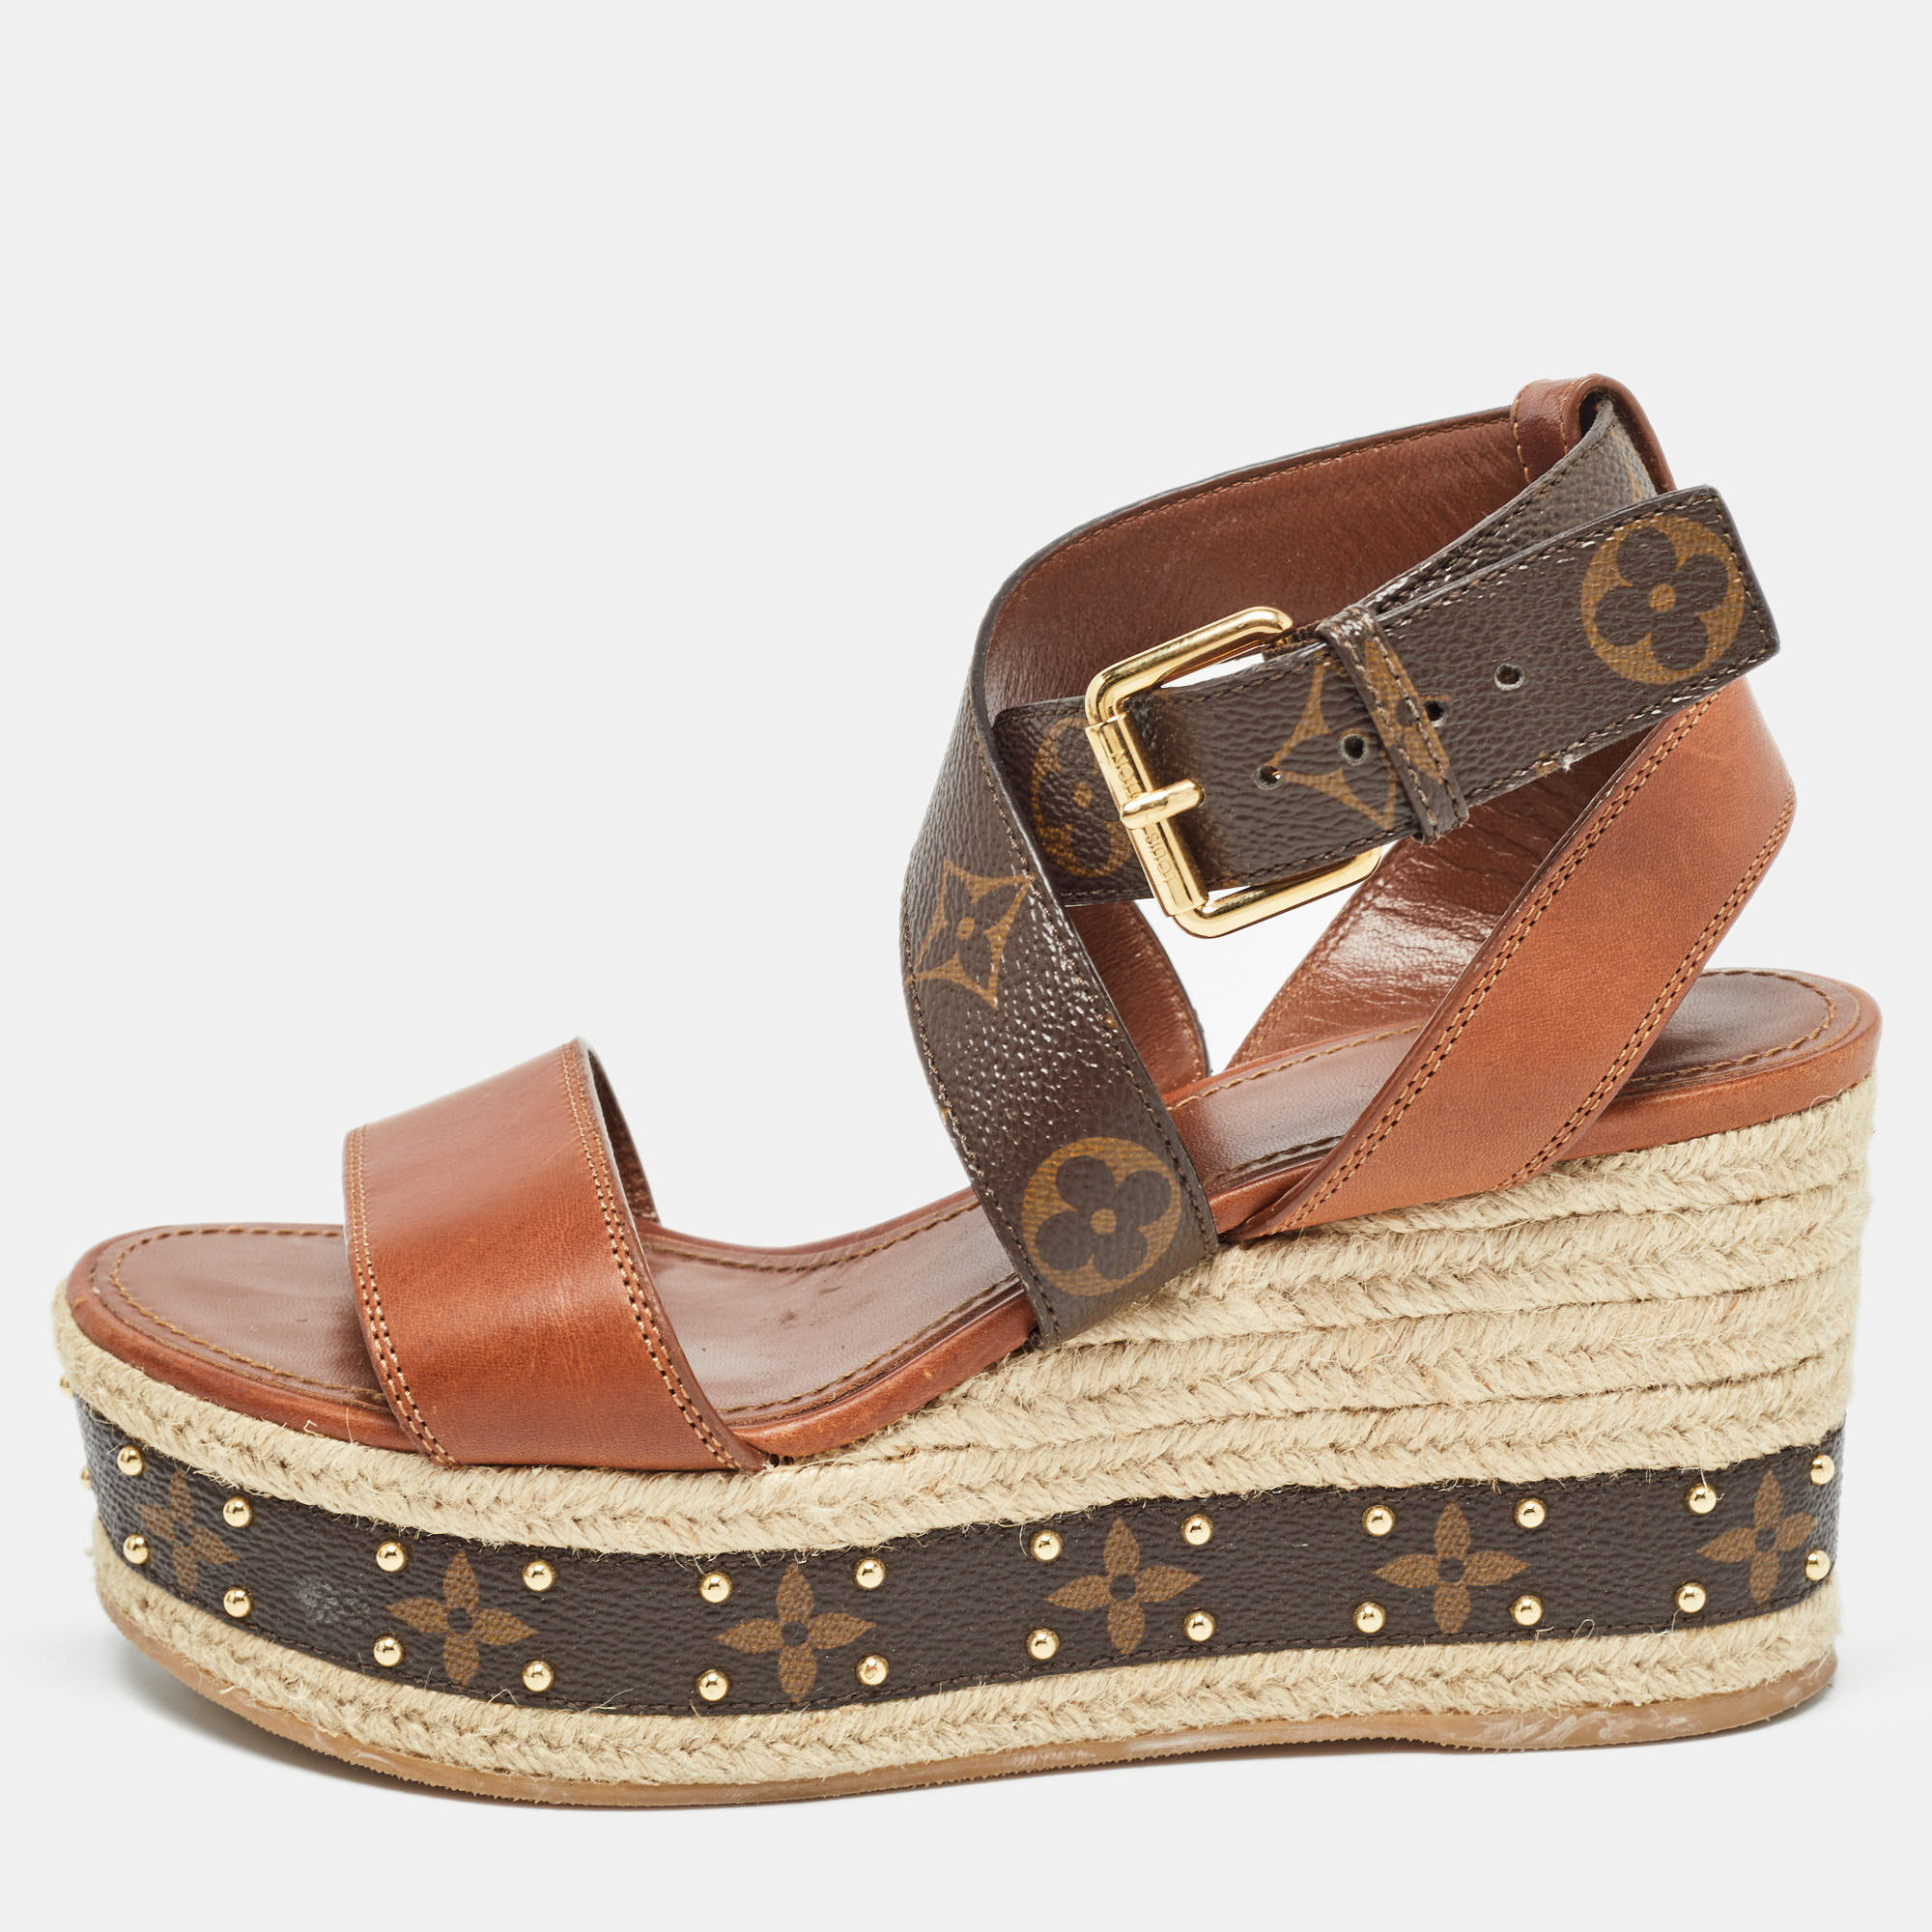 Louis vuitton brown leather and monogram canvas boundary wedge sandals size 37